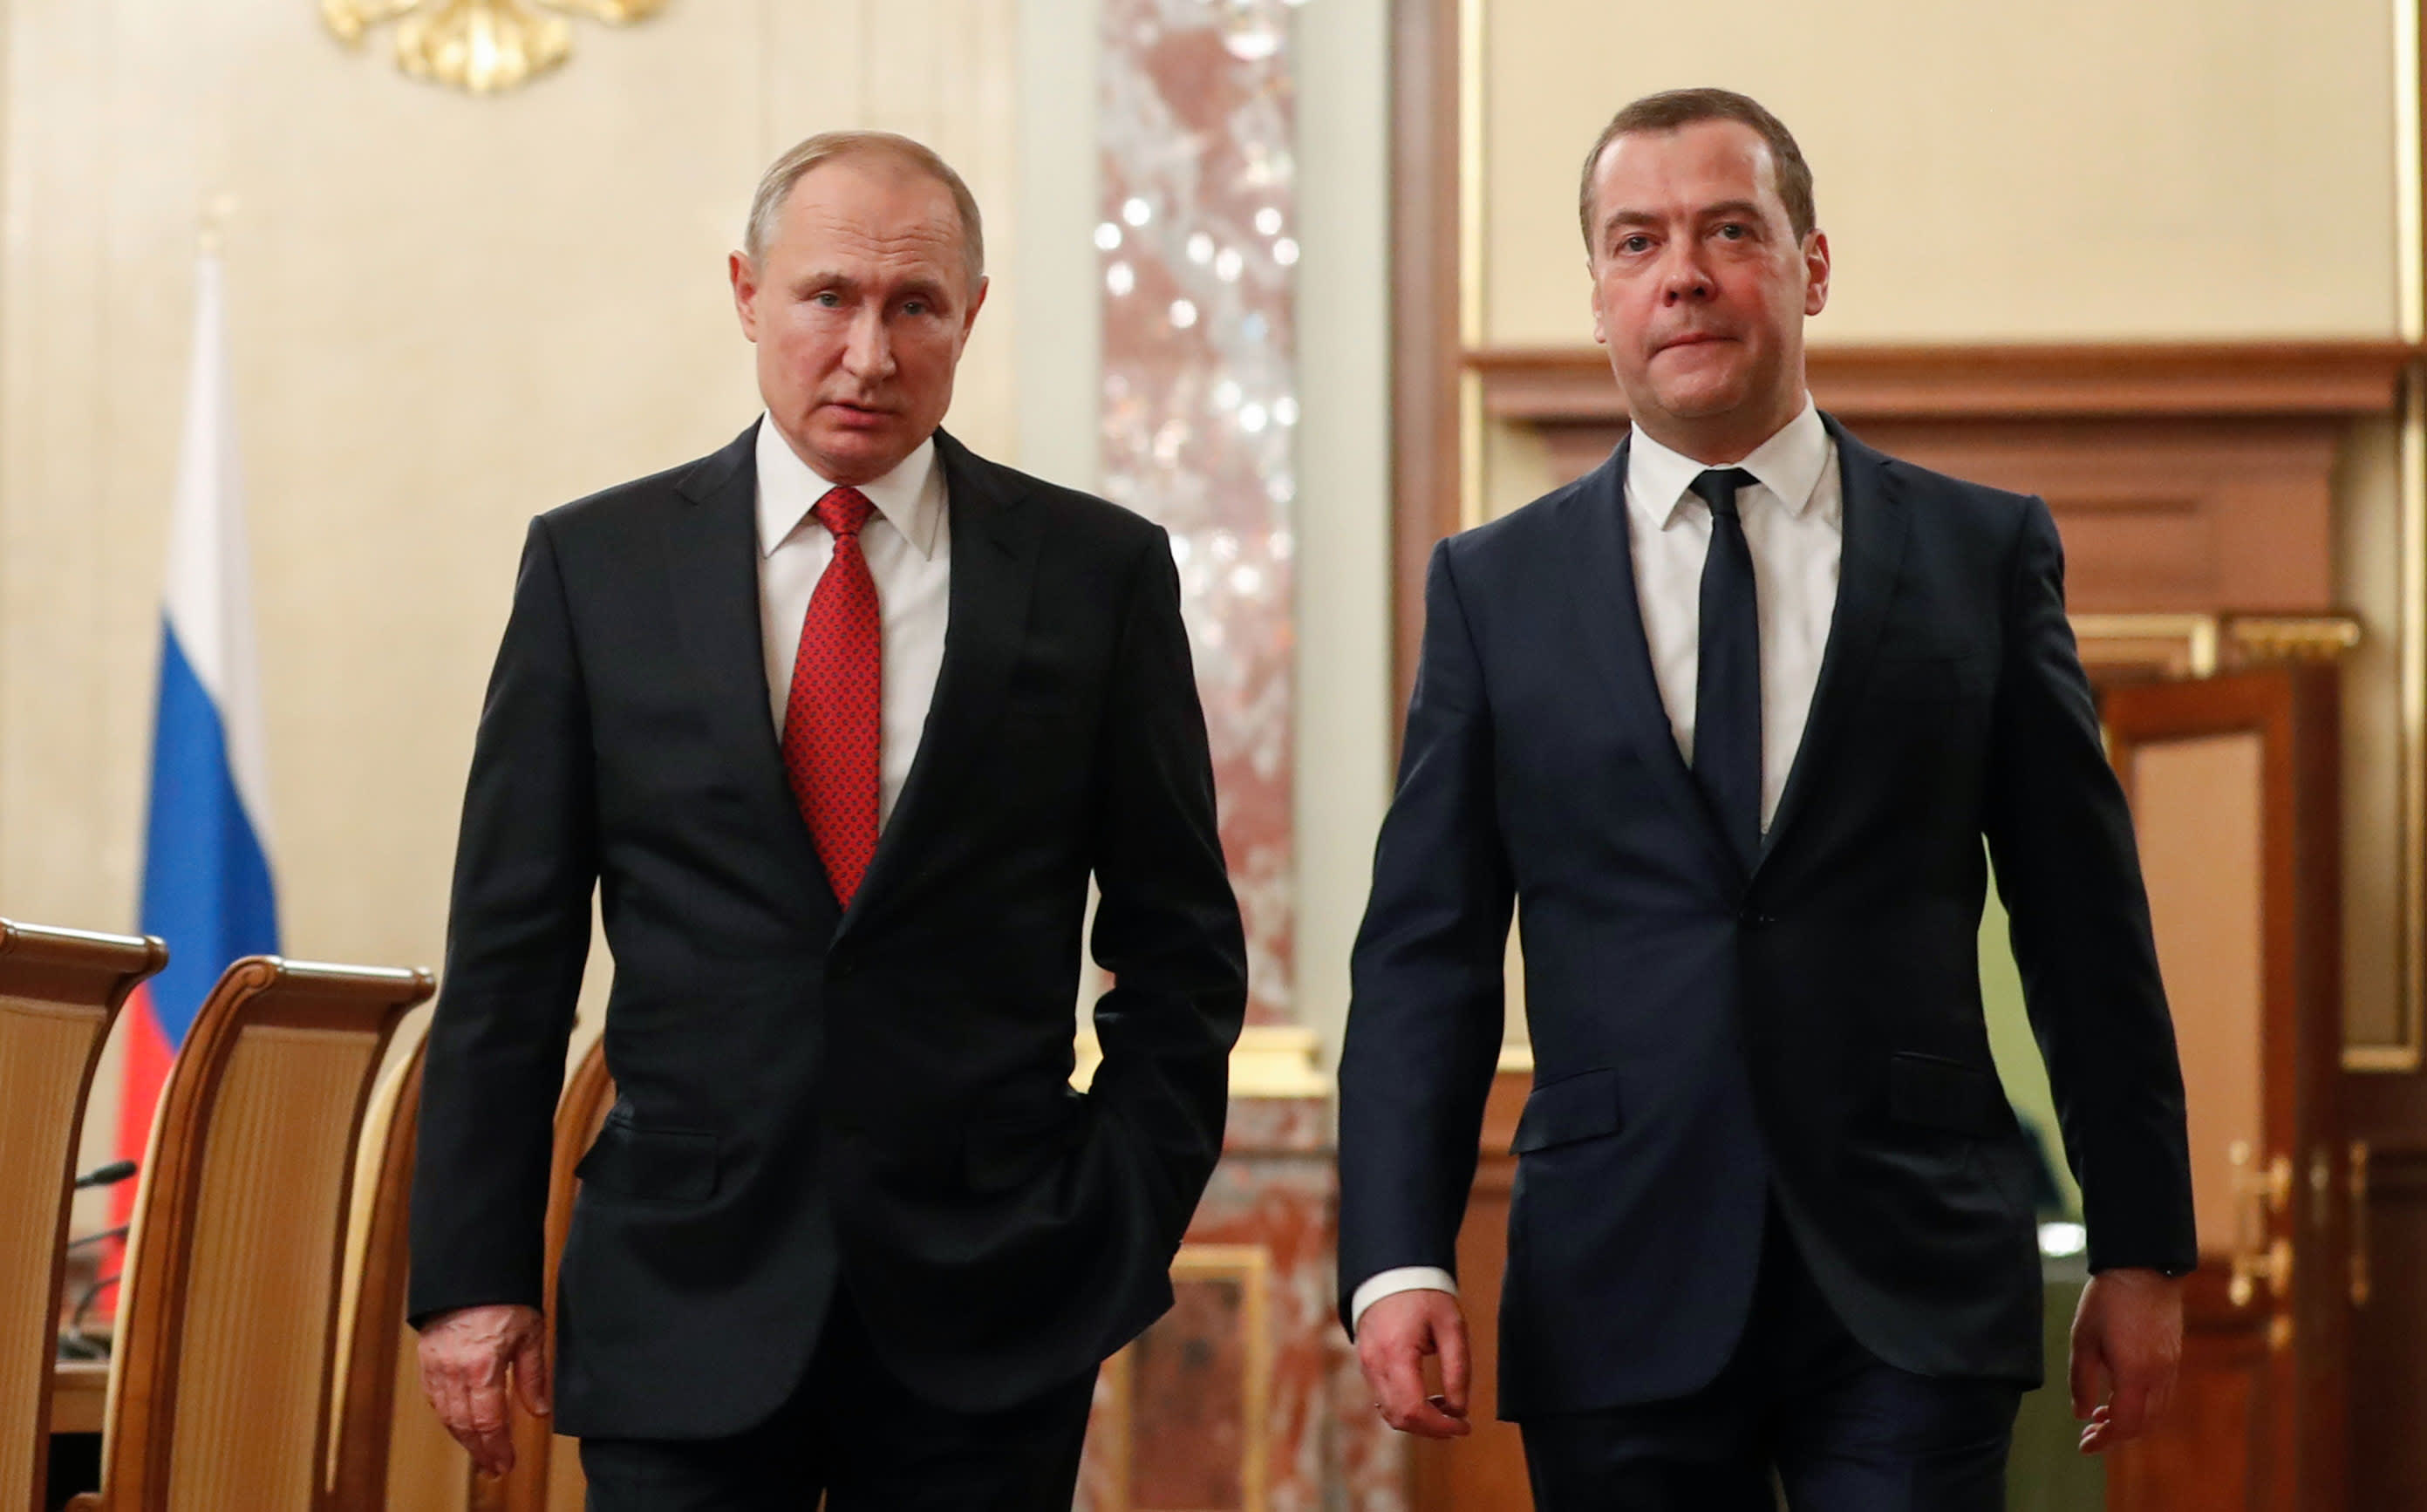 Putin S Call For Reform Of Russia Govt Leads To Medvedev Resignation